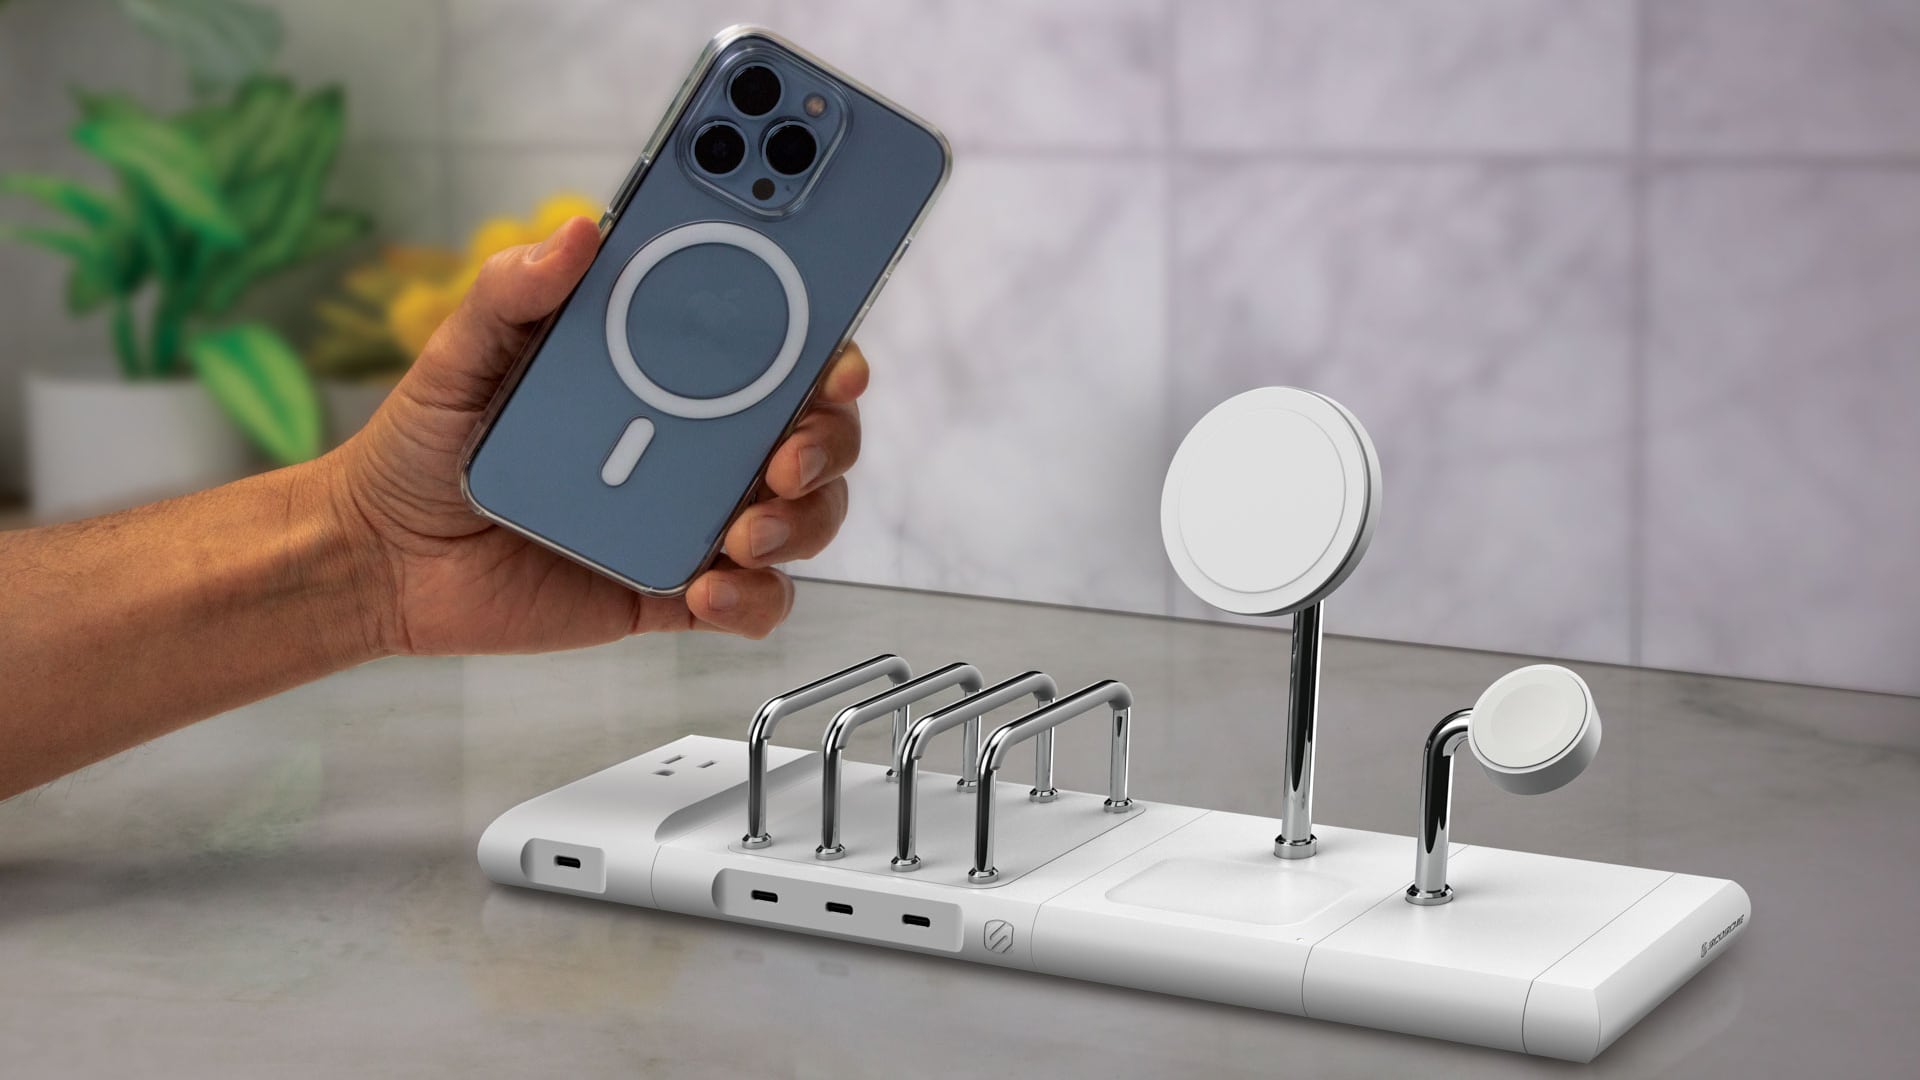 CES 2023: Scosche Announces BaseLynx 2.0 Modular Charging System and Water Bottle MagSafe Mount